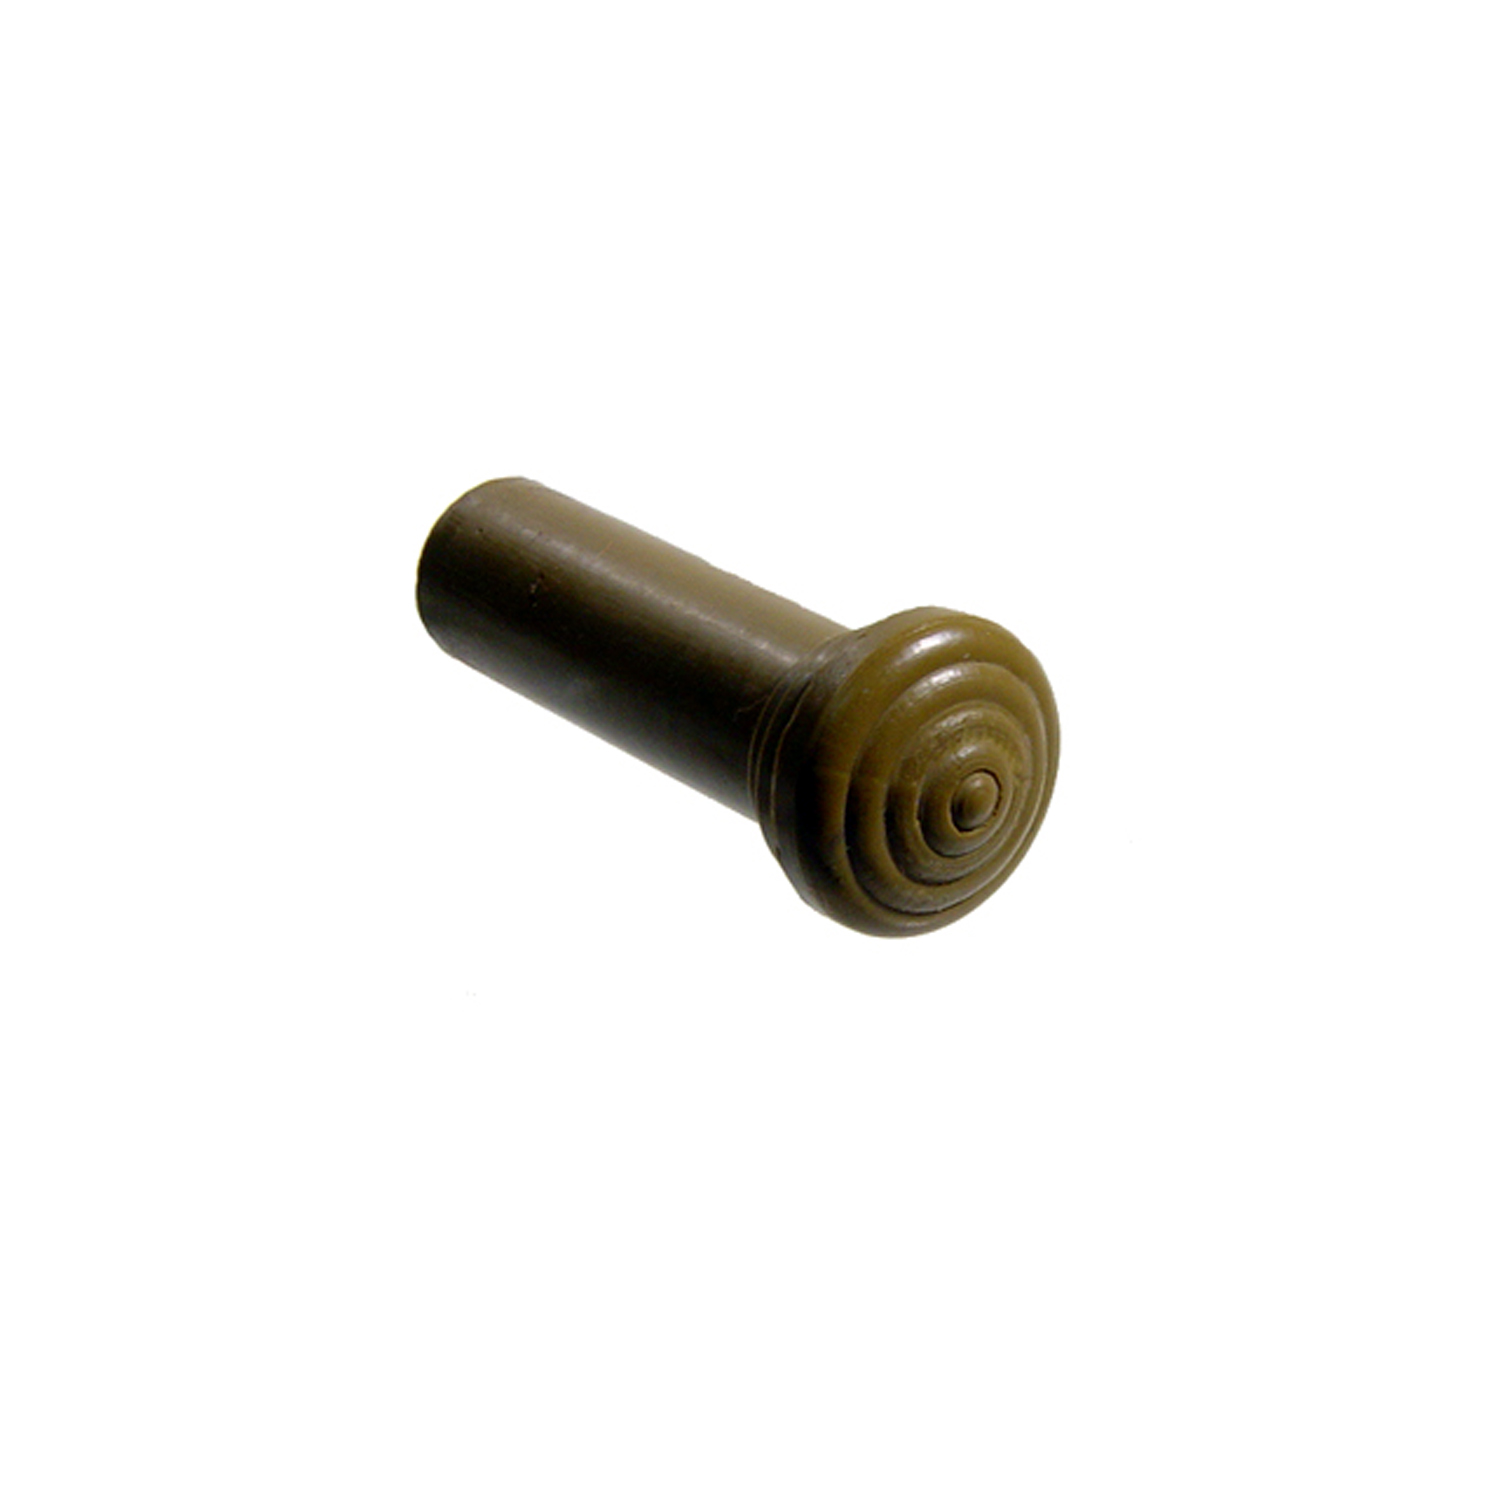 1941 Cadillac Series 67 Door Lock Knob.  Made of Olive Green rubber, self-threading-RP 304-G